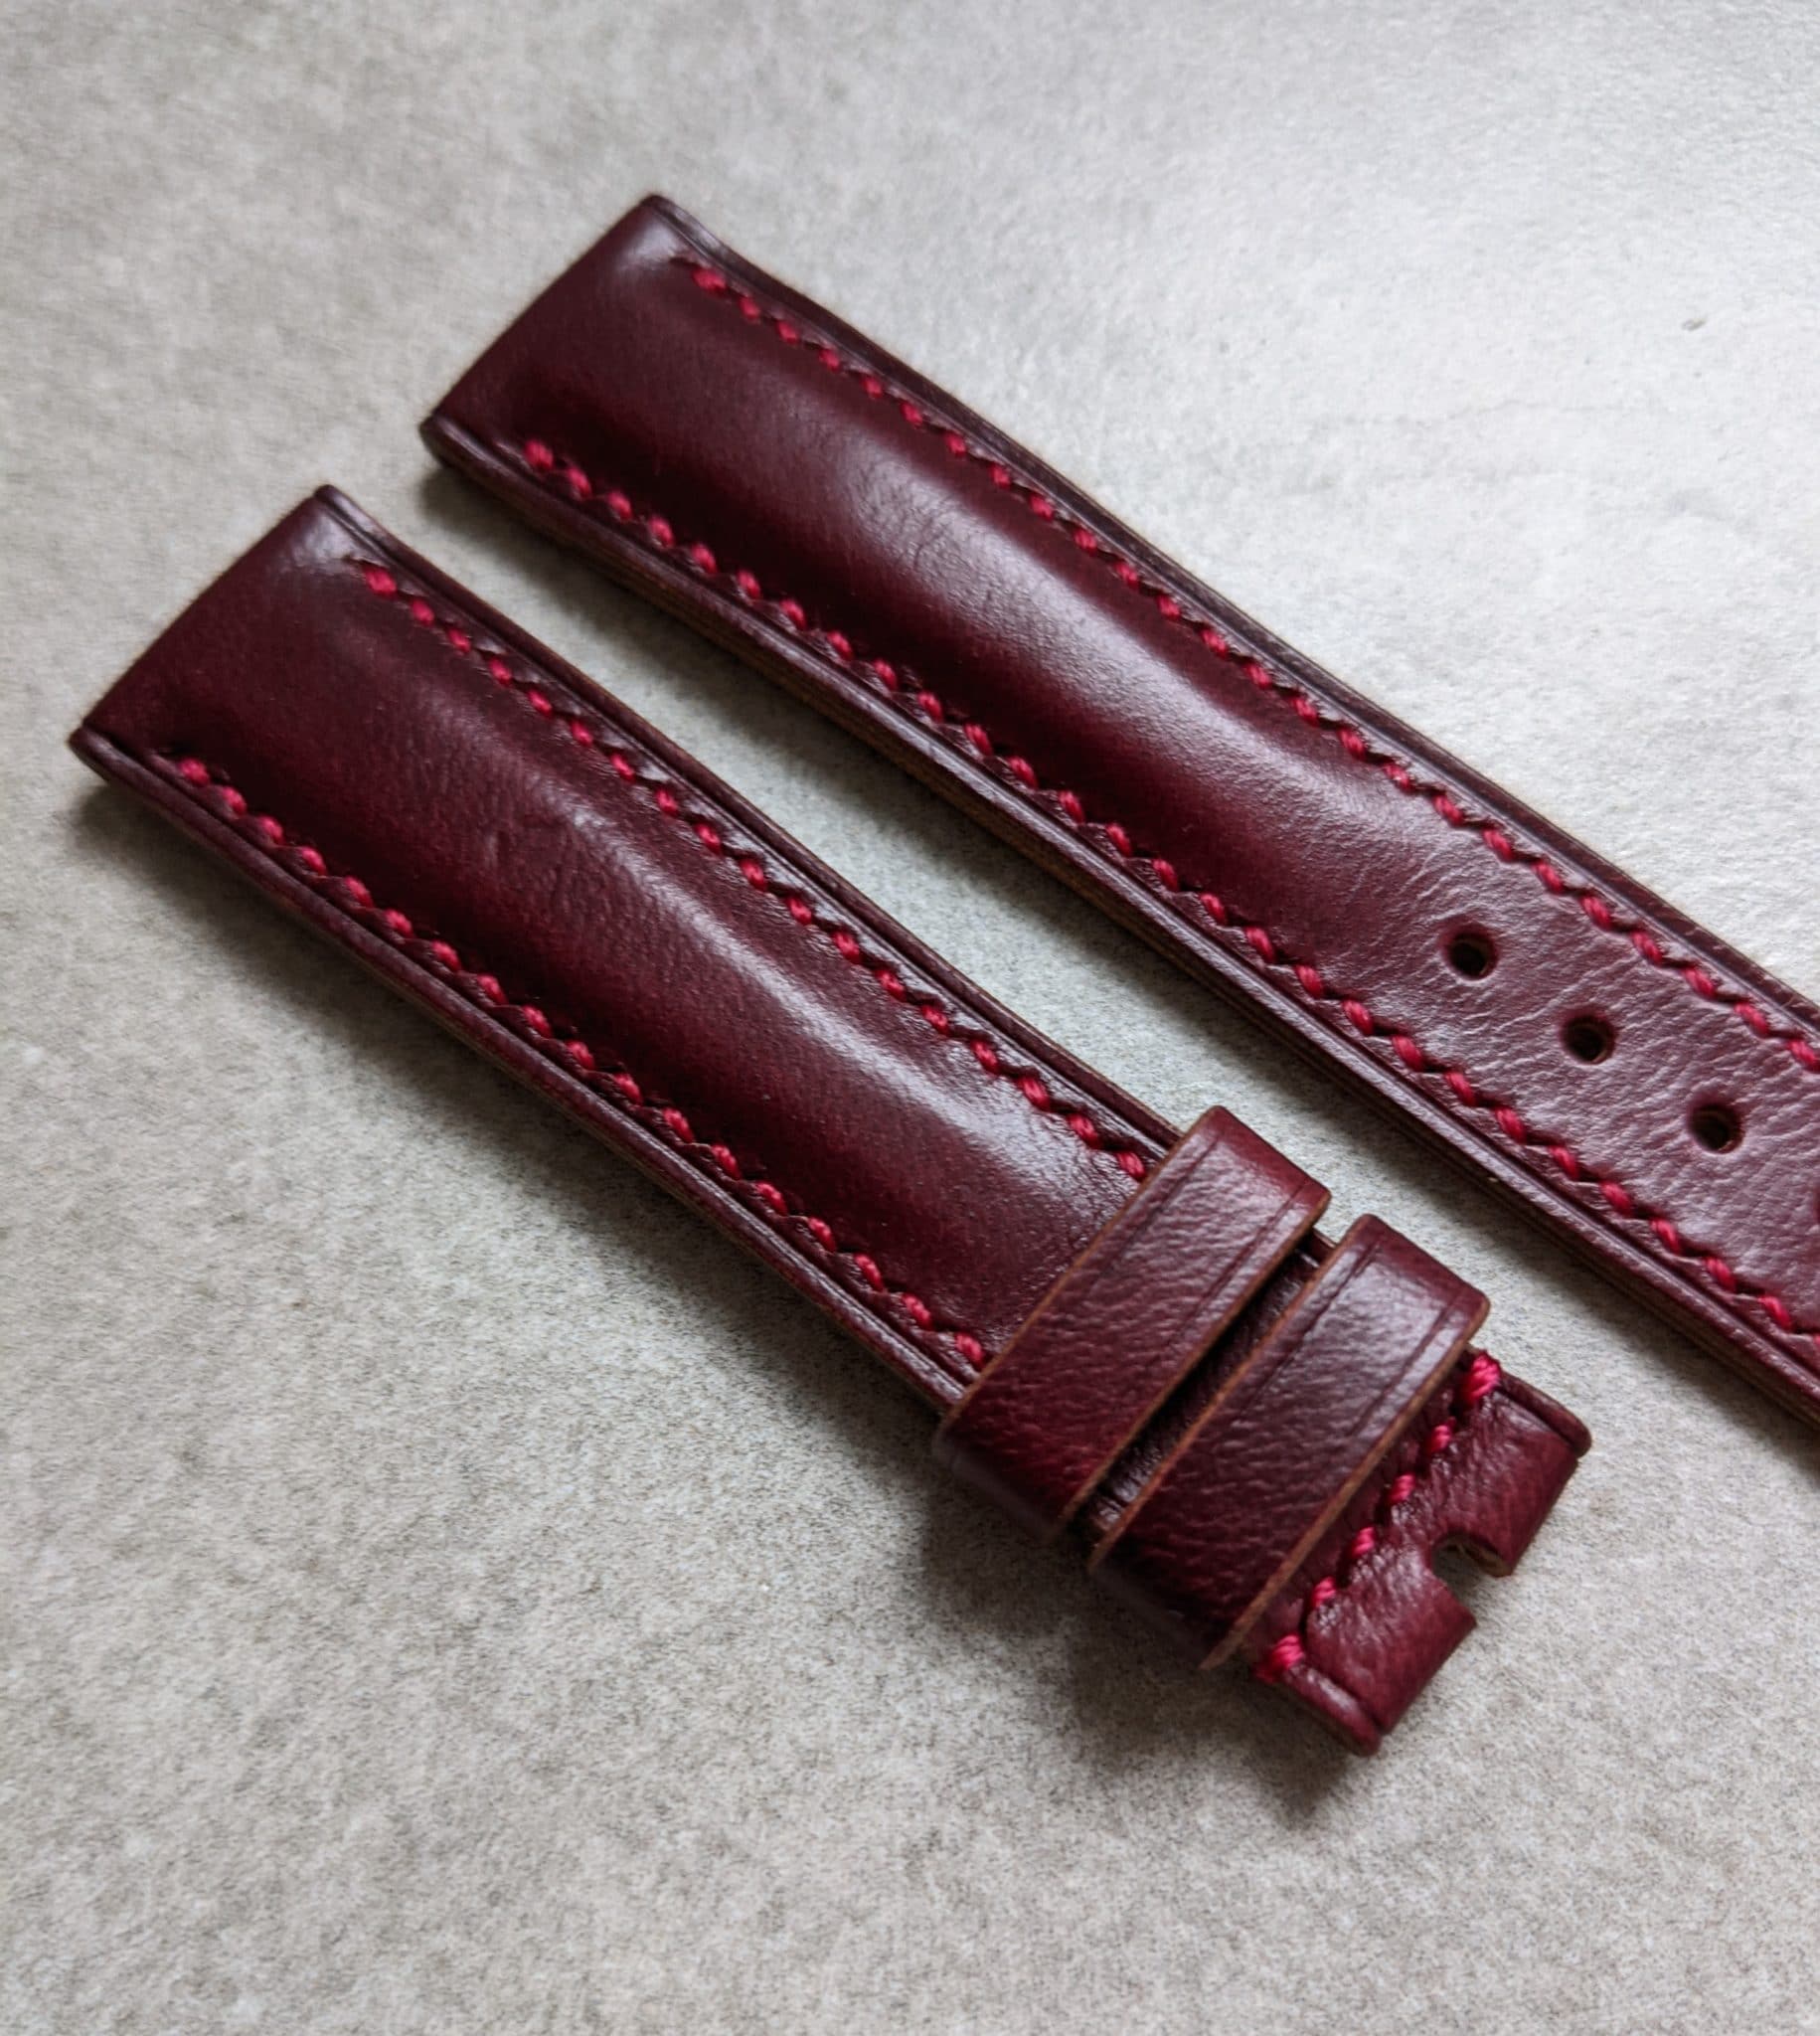 The Classics - Burgundy - The Strap Tailor